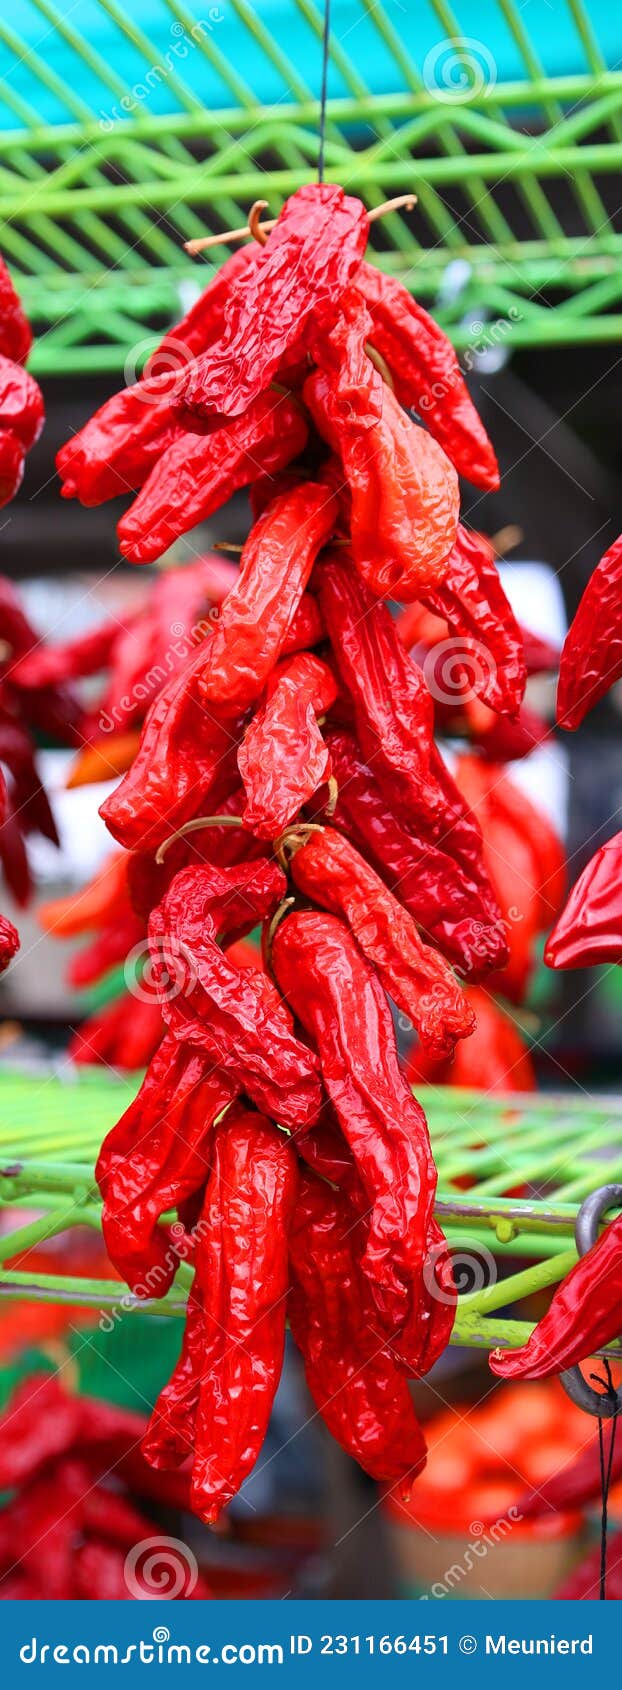 dry peppers: pimientos choriceros, dry hot guindilla peppers